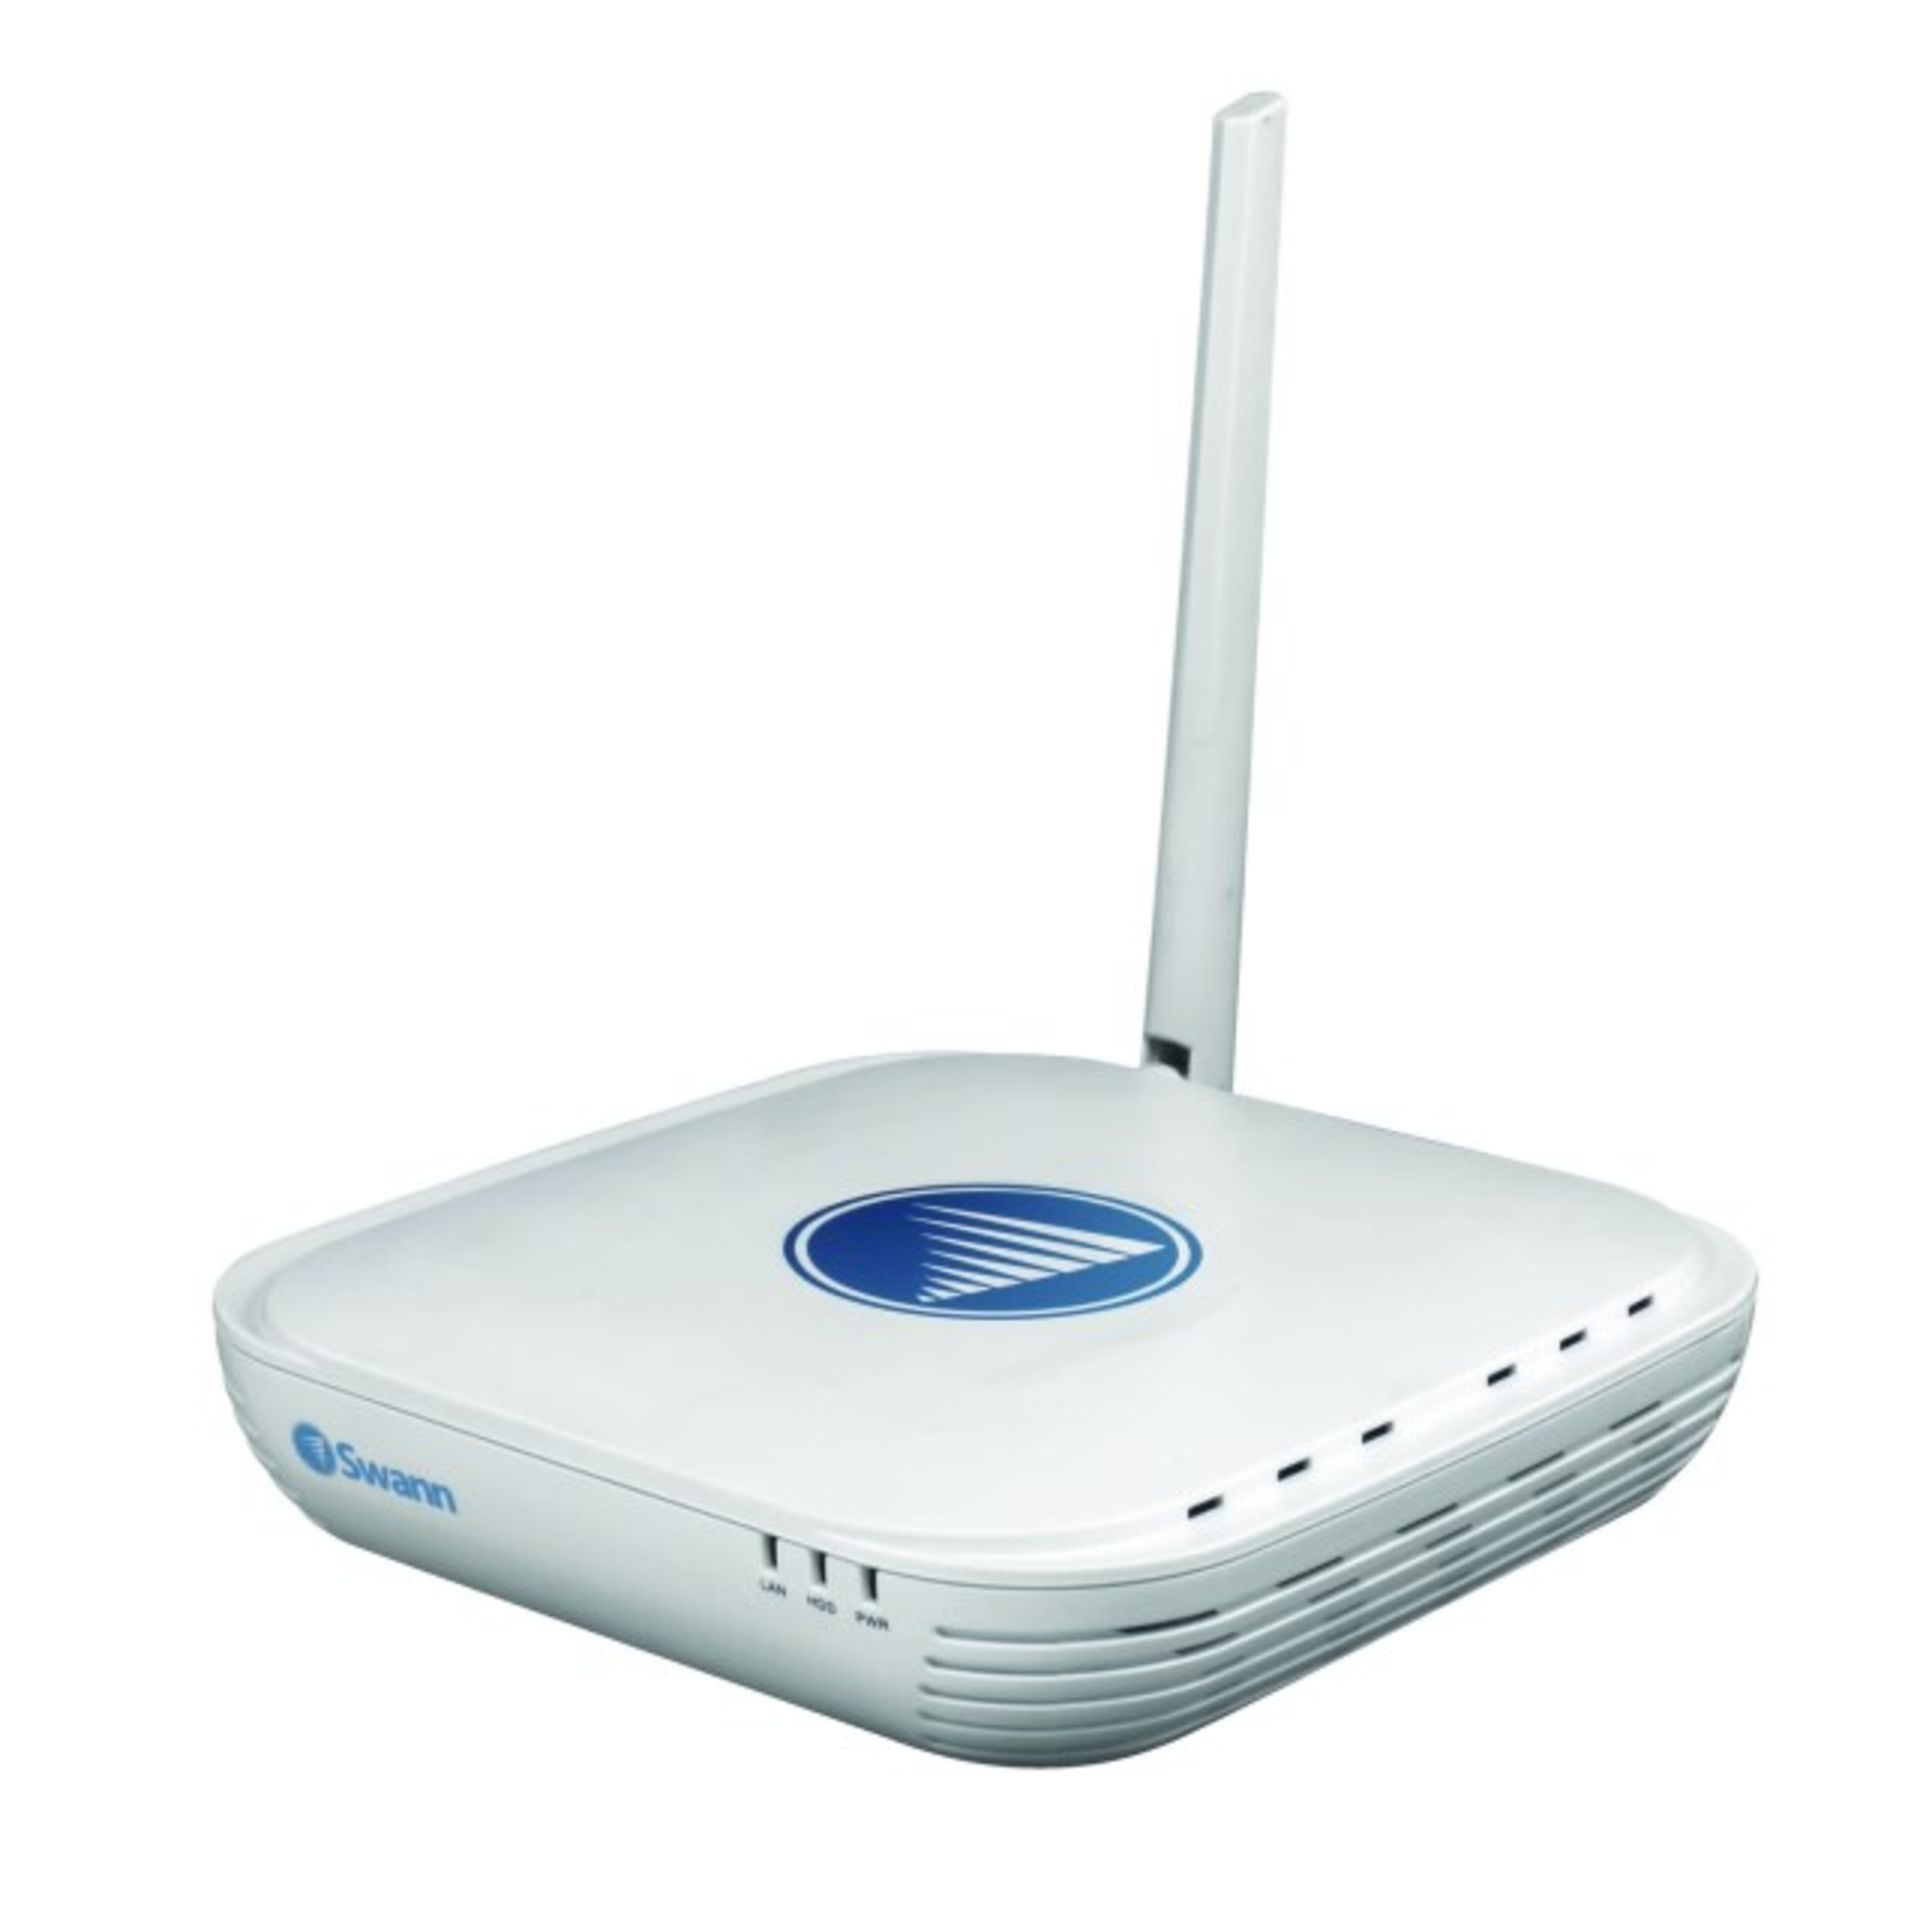 V Brand New Swann HD Micro Wifi Video and Alarm Security Kit (Screwfix £499.99) Complete Wireless - Image 2 of 2